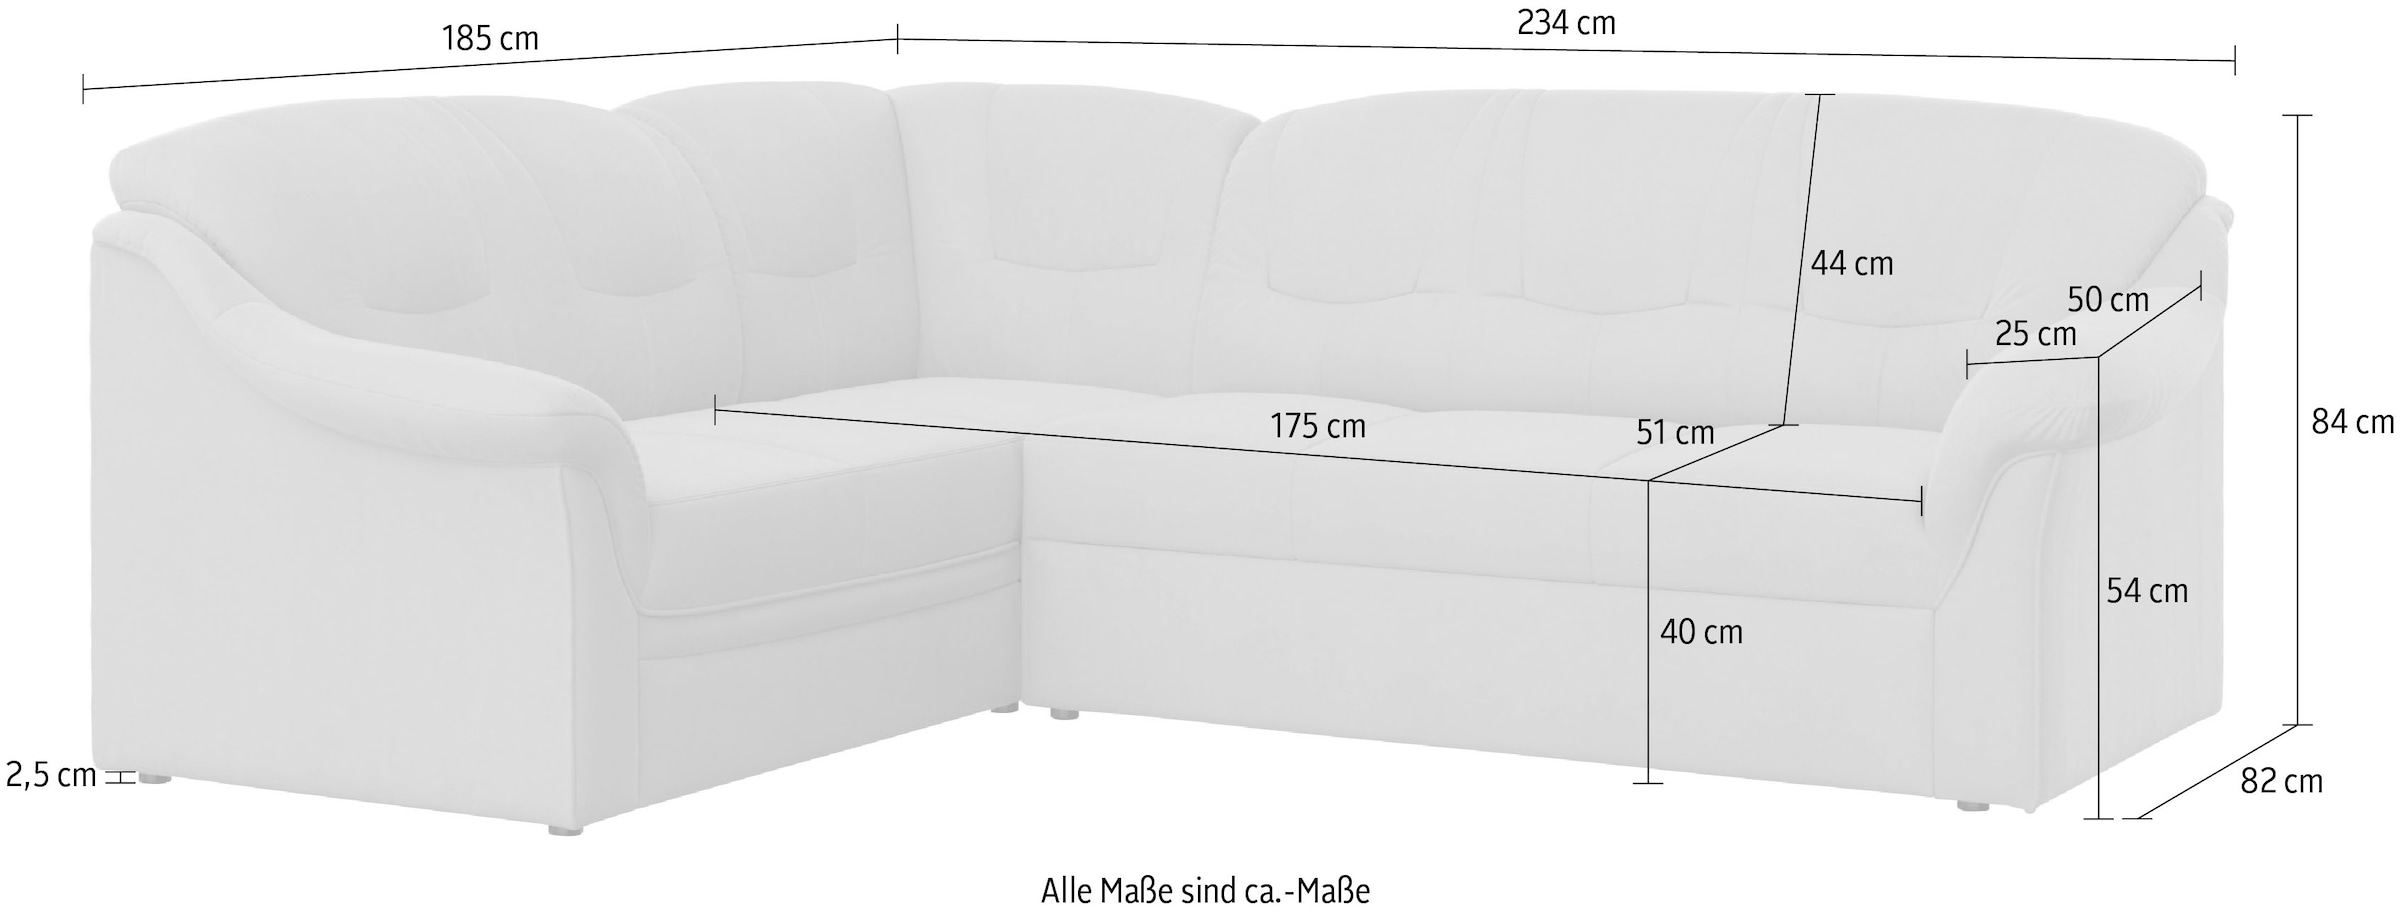 DOMO collection Ecksofa »Montana L-Form«, wahlweise mit Bettfunktion